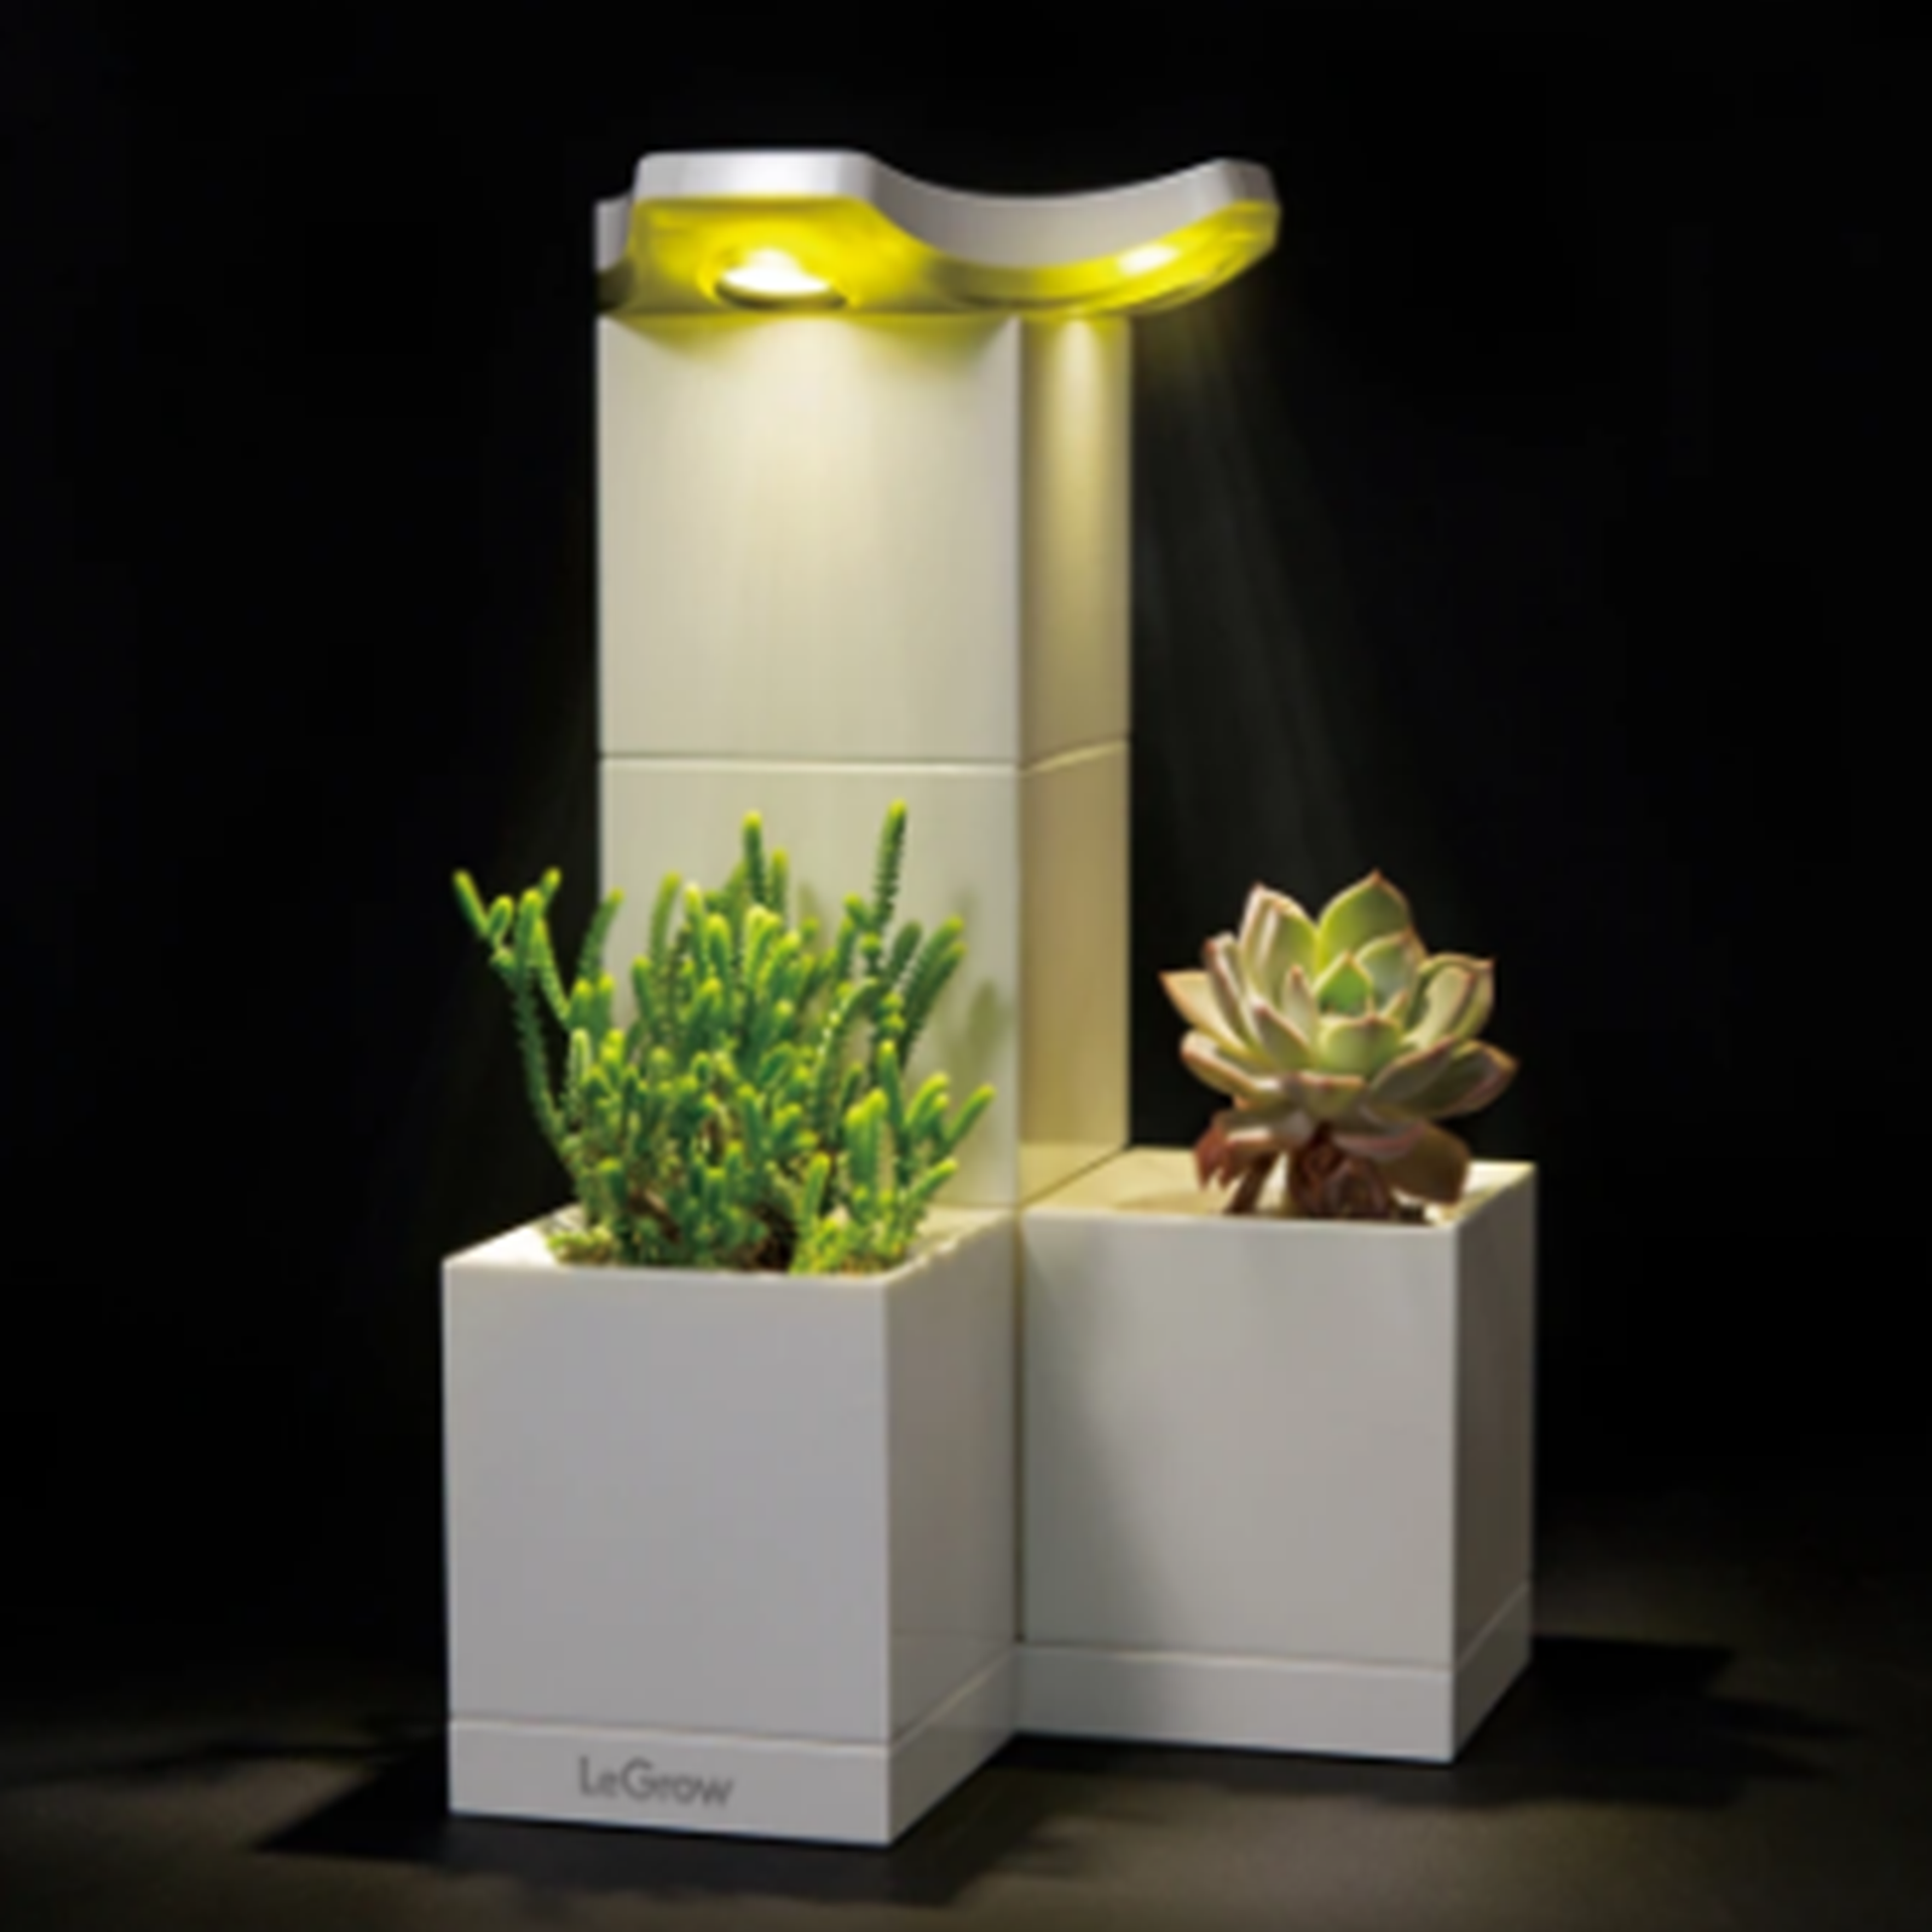 LeGrow TG-L Modular Indoor Smart Garden With Light Planted with the Light on | Happy Piranha